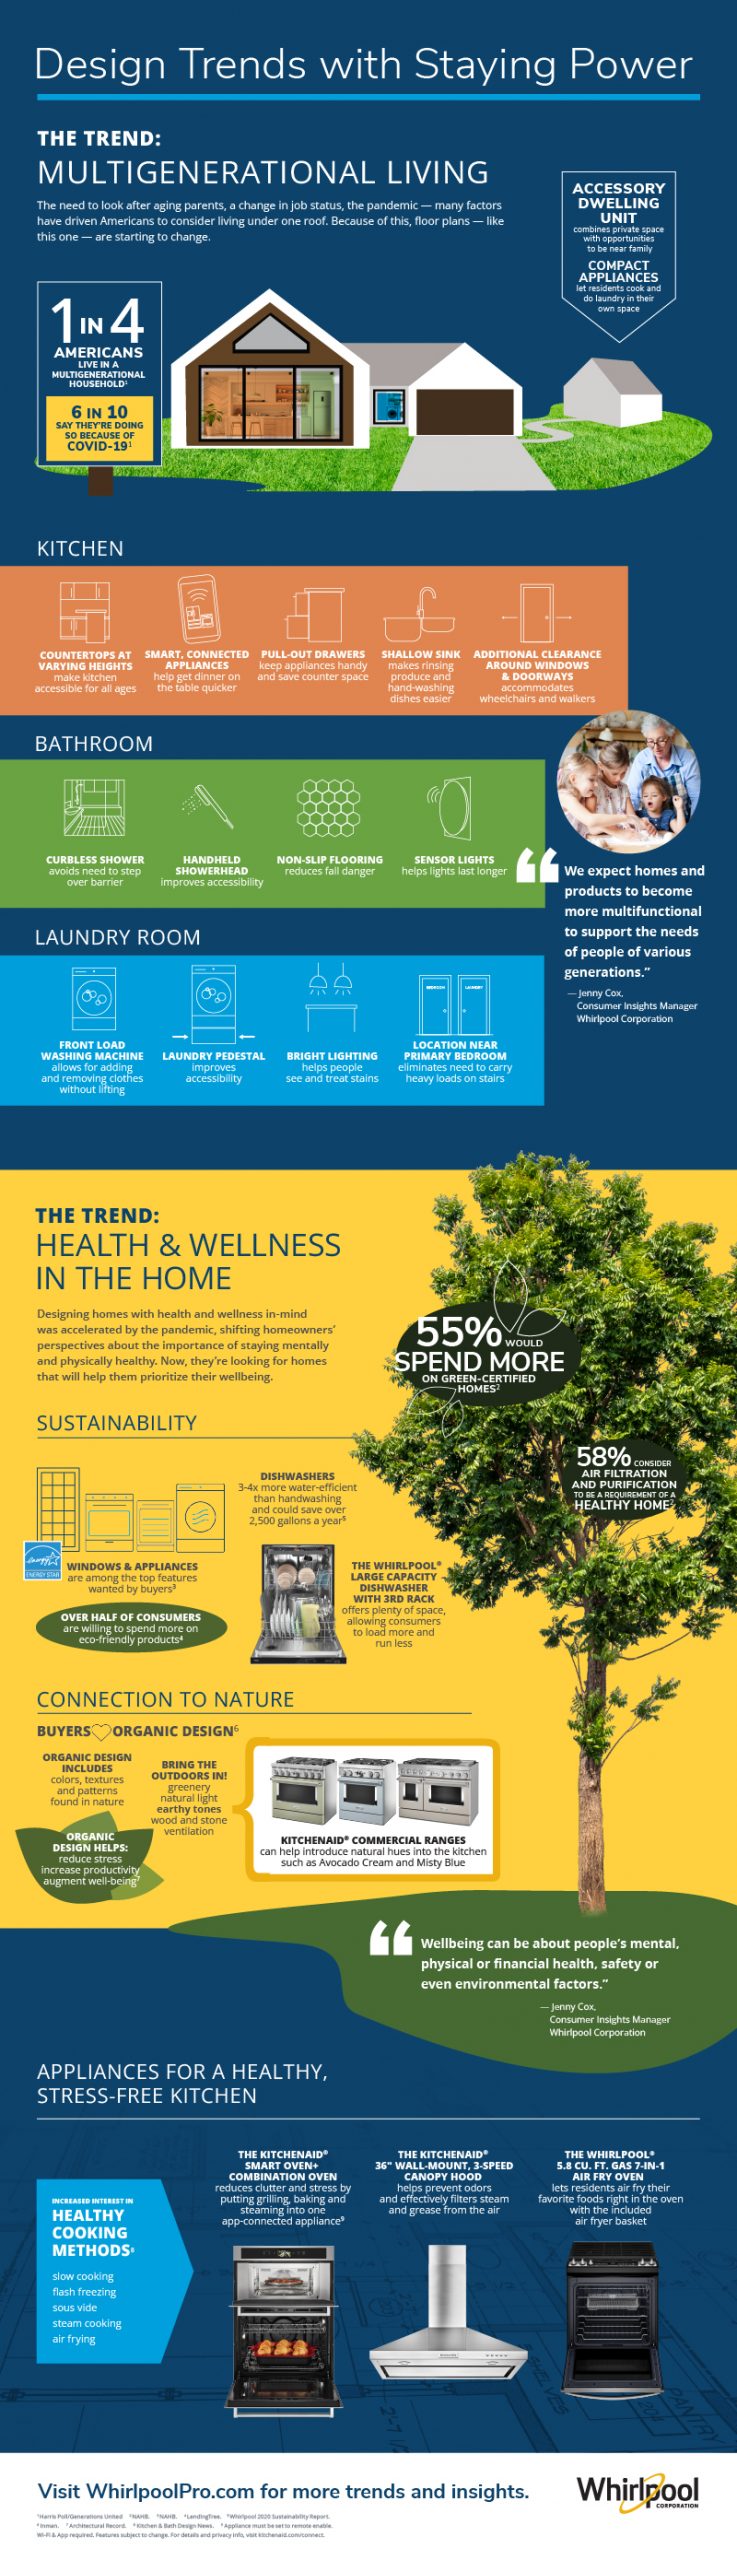 Design Trends with Staying Power Infographic